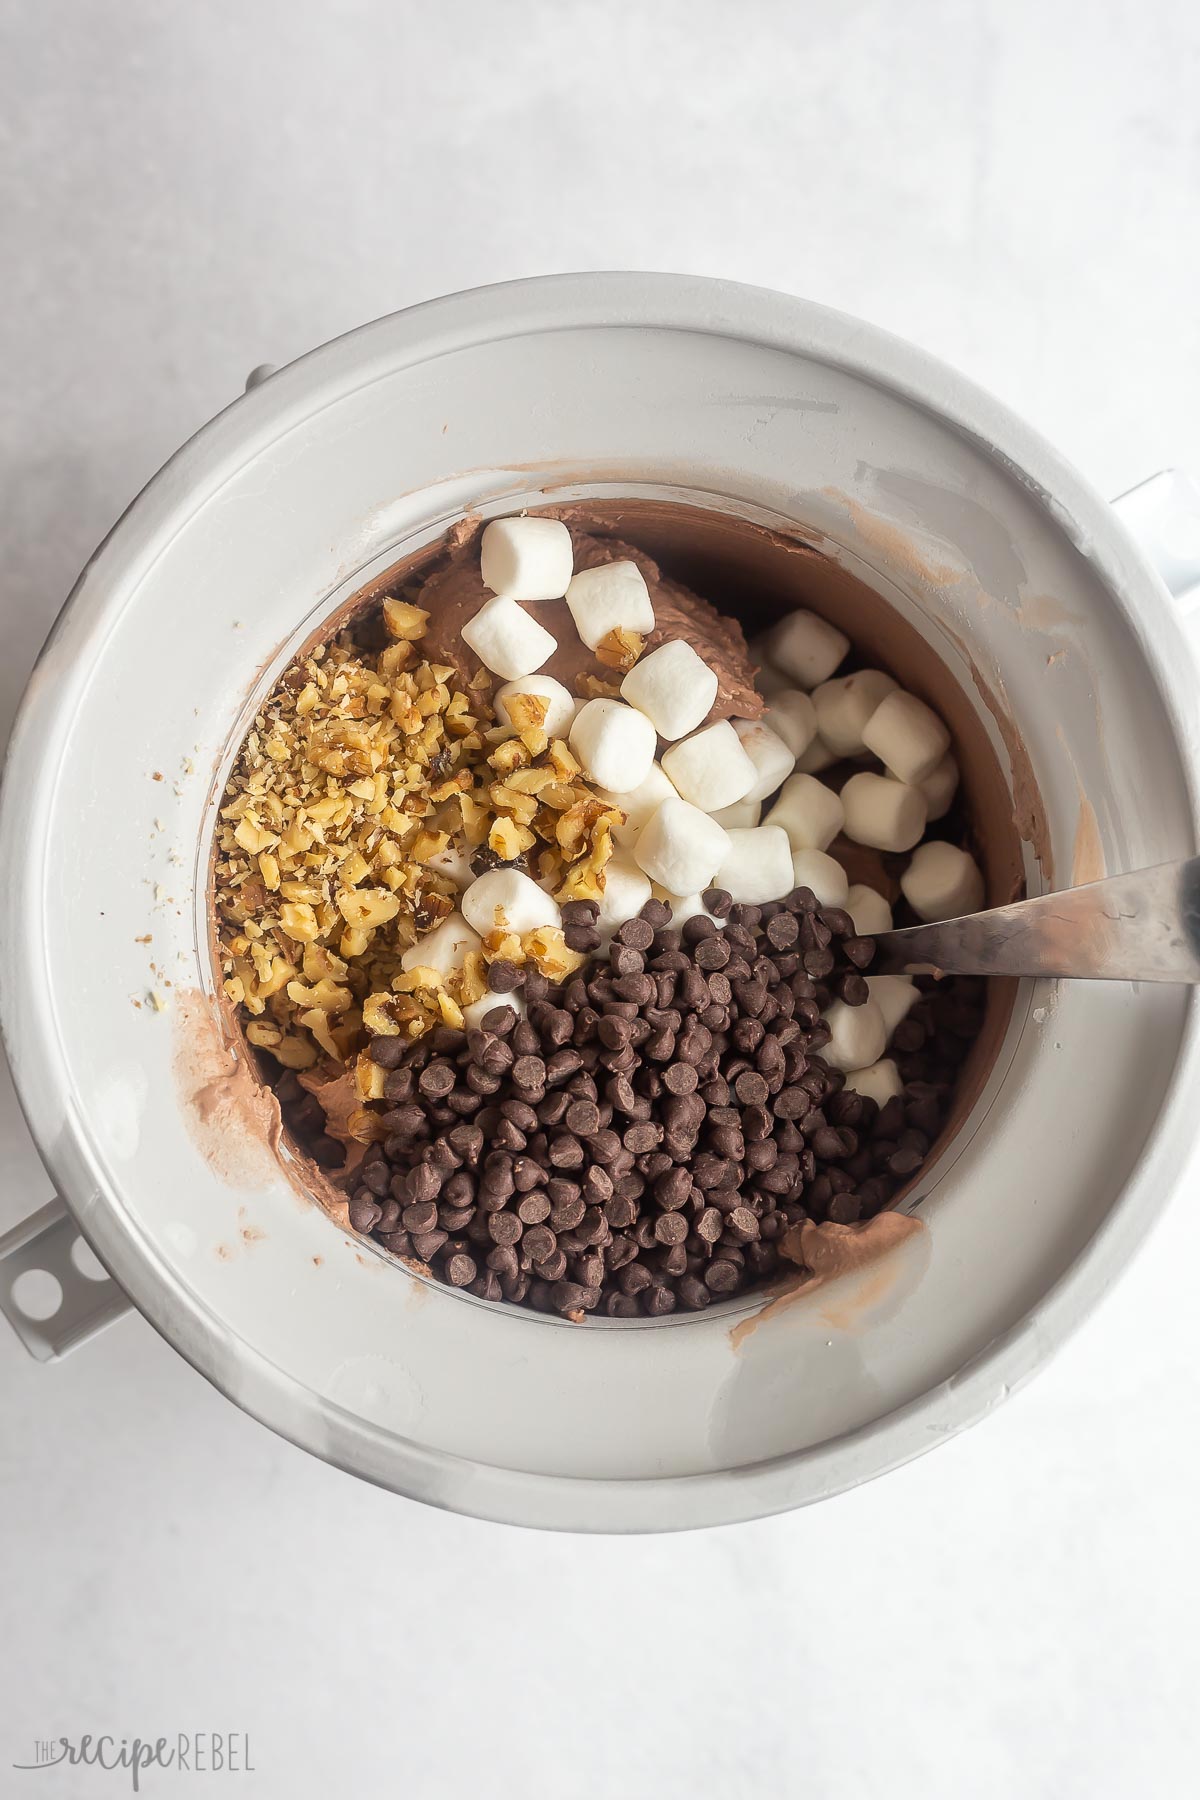 chocolate ice cream in ice cream maker with nuts marshmallows and chocolate chips.